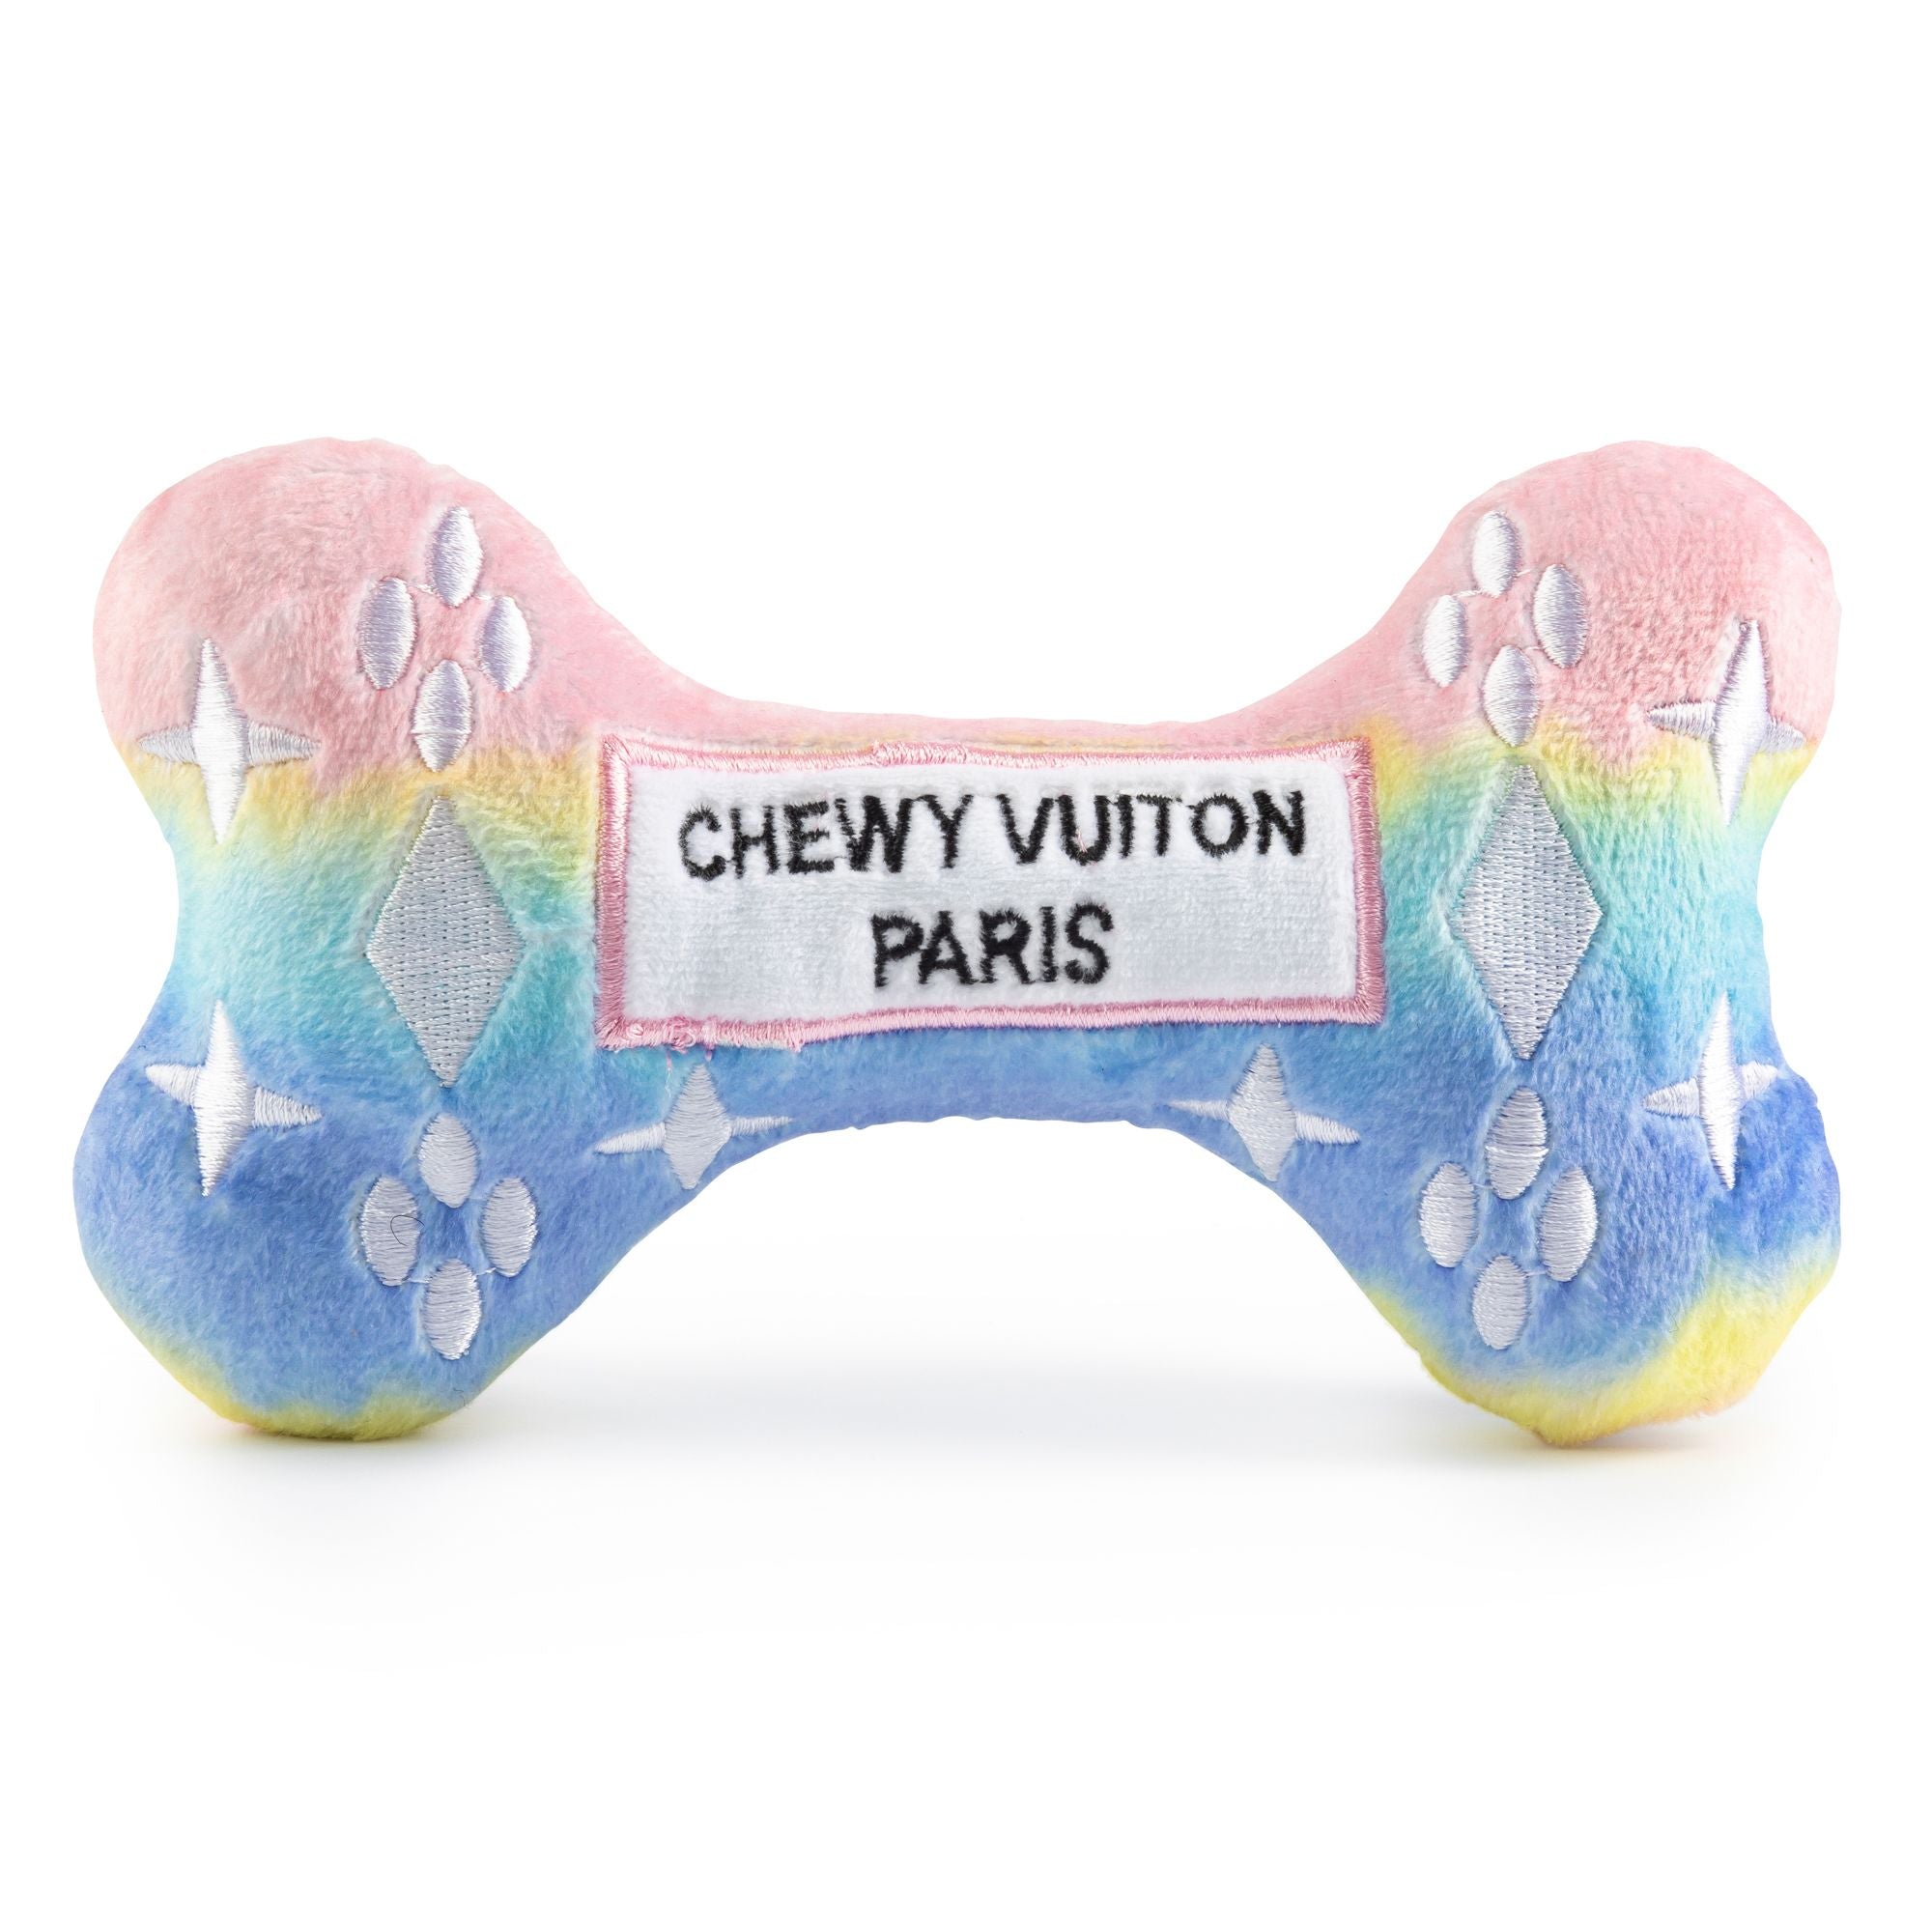 Chewy Vuiton Pink Ombre Bone Toy, Pink Ombre Chewy Vuiton